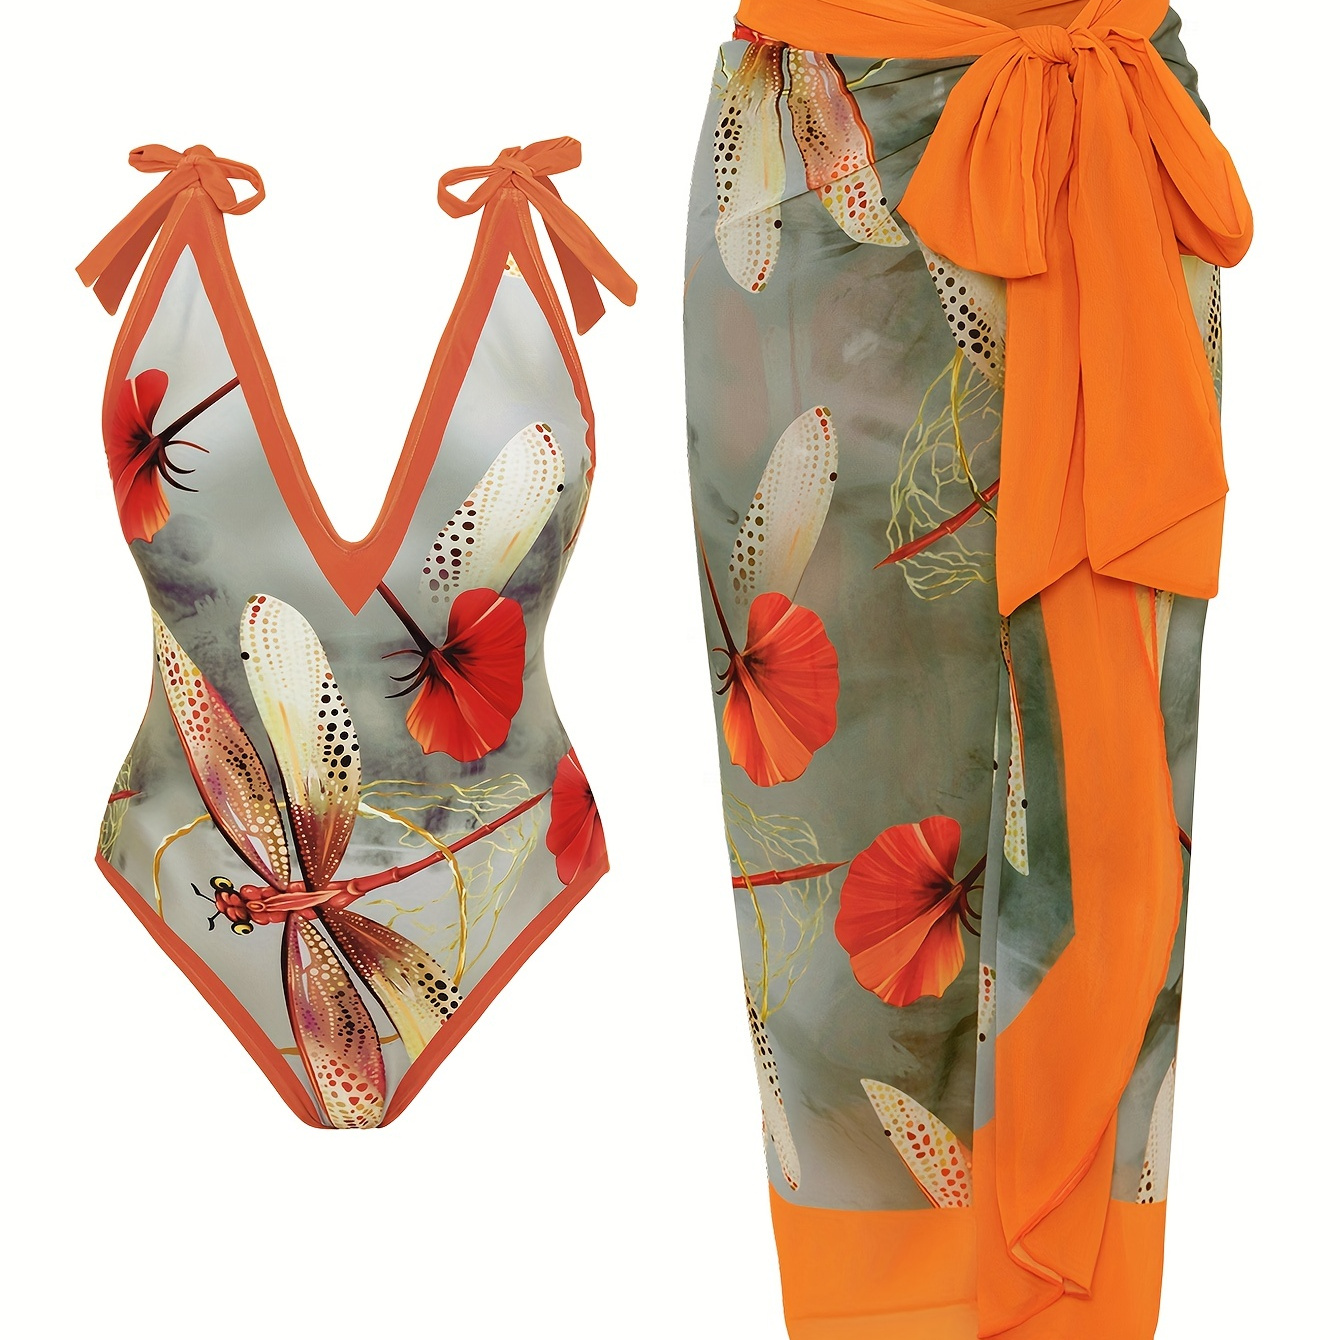 

Dragonfly Leaf Print Orange Retro 2 Piece Swimsuits, Deep V Neck Tie Shoulder One-piece Bathing-suit & Bowknot Cover Up Skirt, Women's Swimwear & Clothing